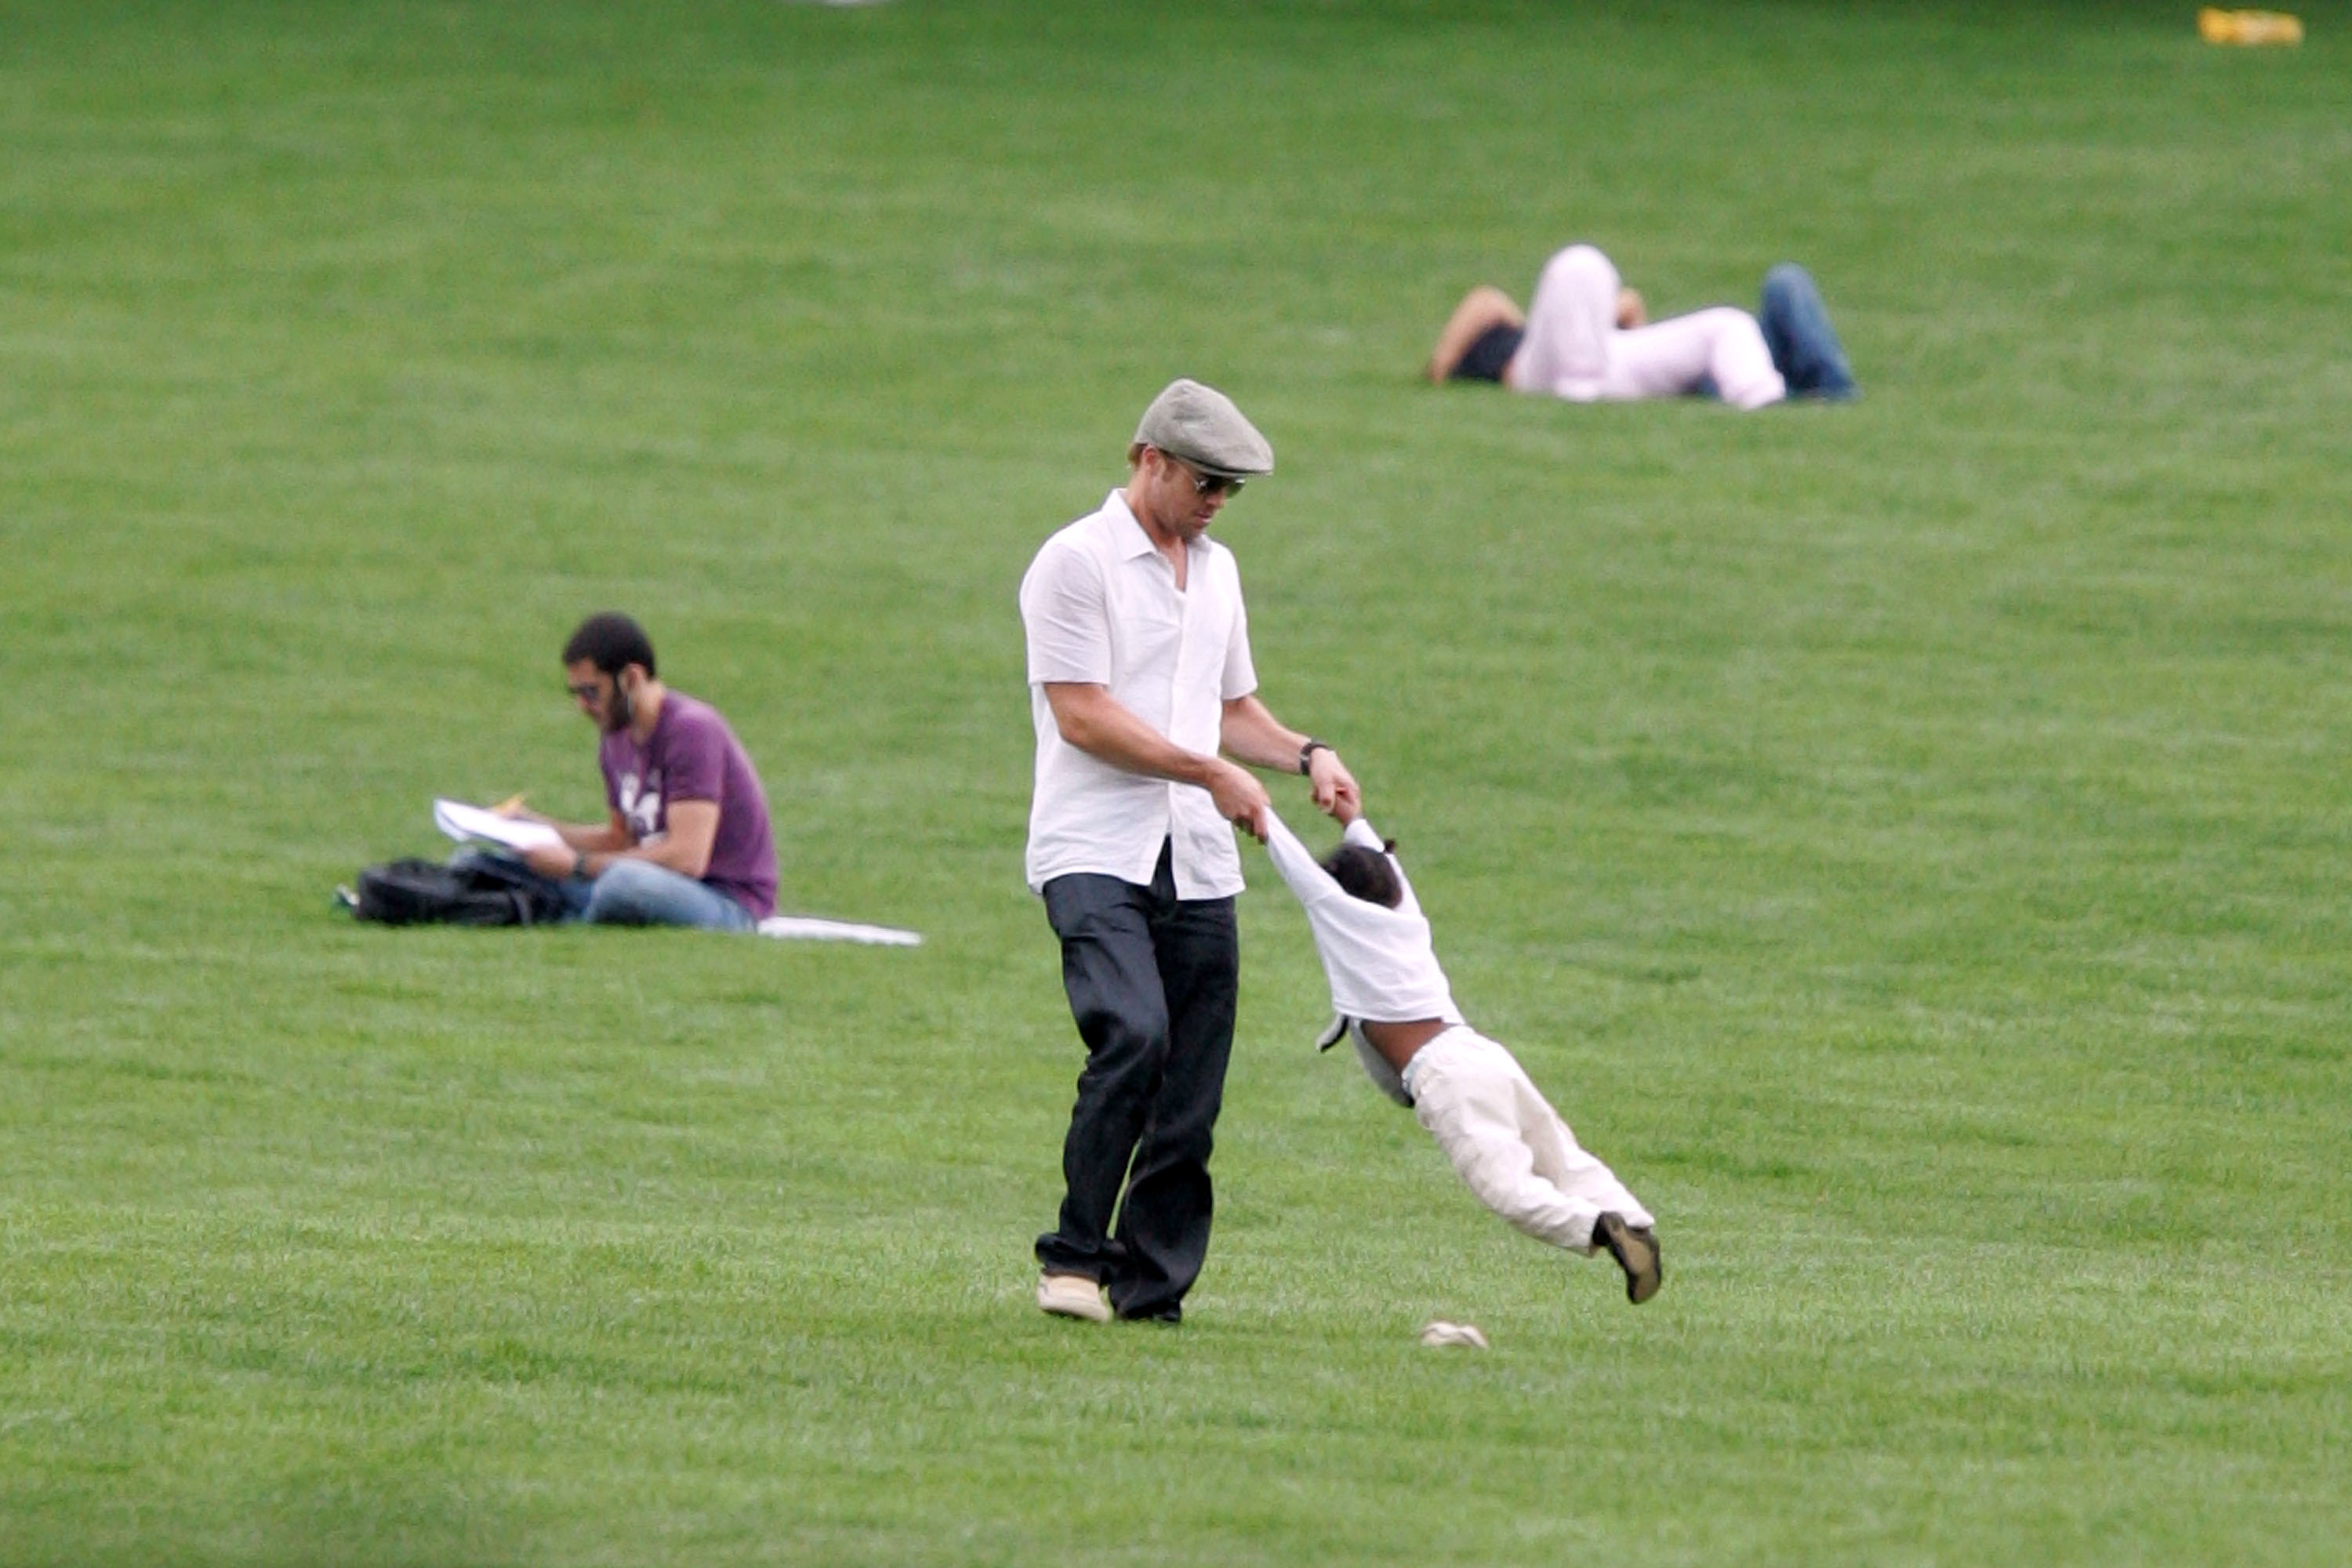 Brad Pitt playing with his daughter Zahara Jolie-Pitt at Central Park on August 28, 2007 in New York City | Source: Getty Images